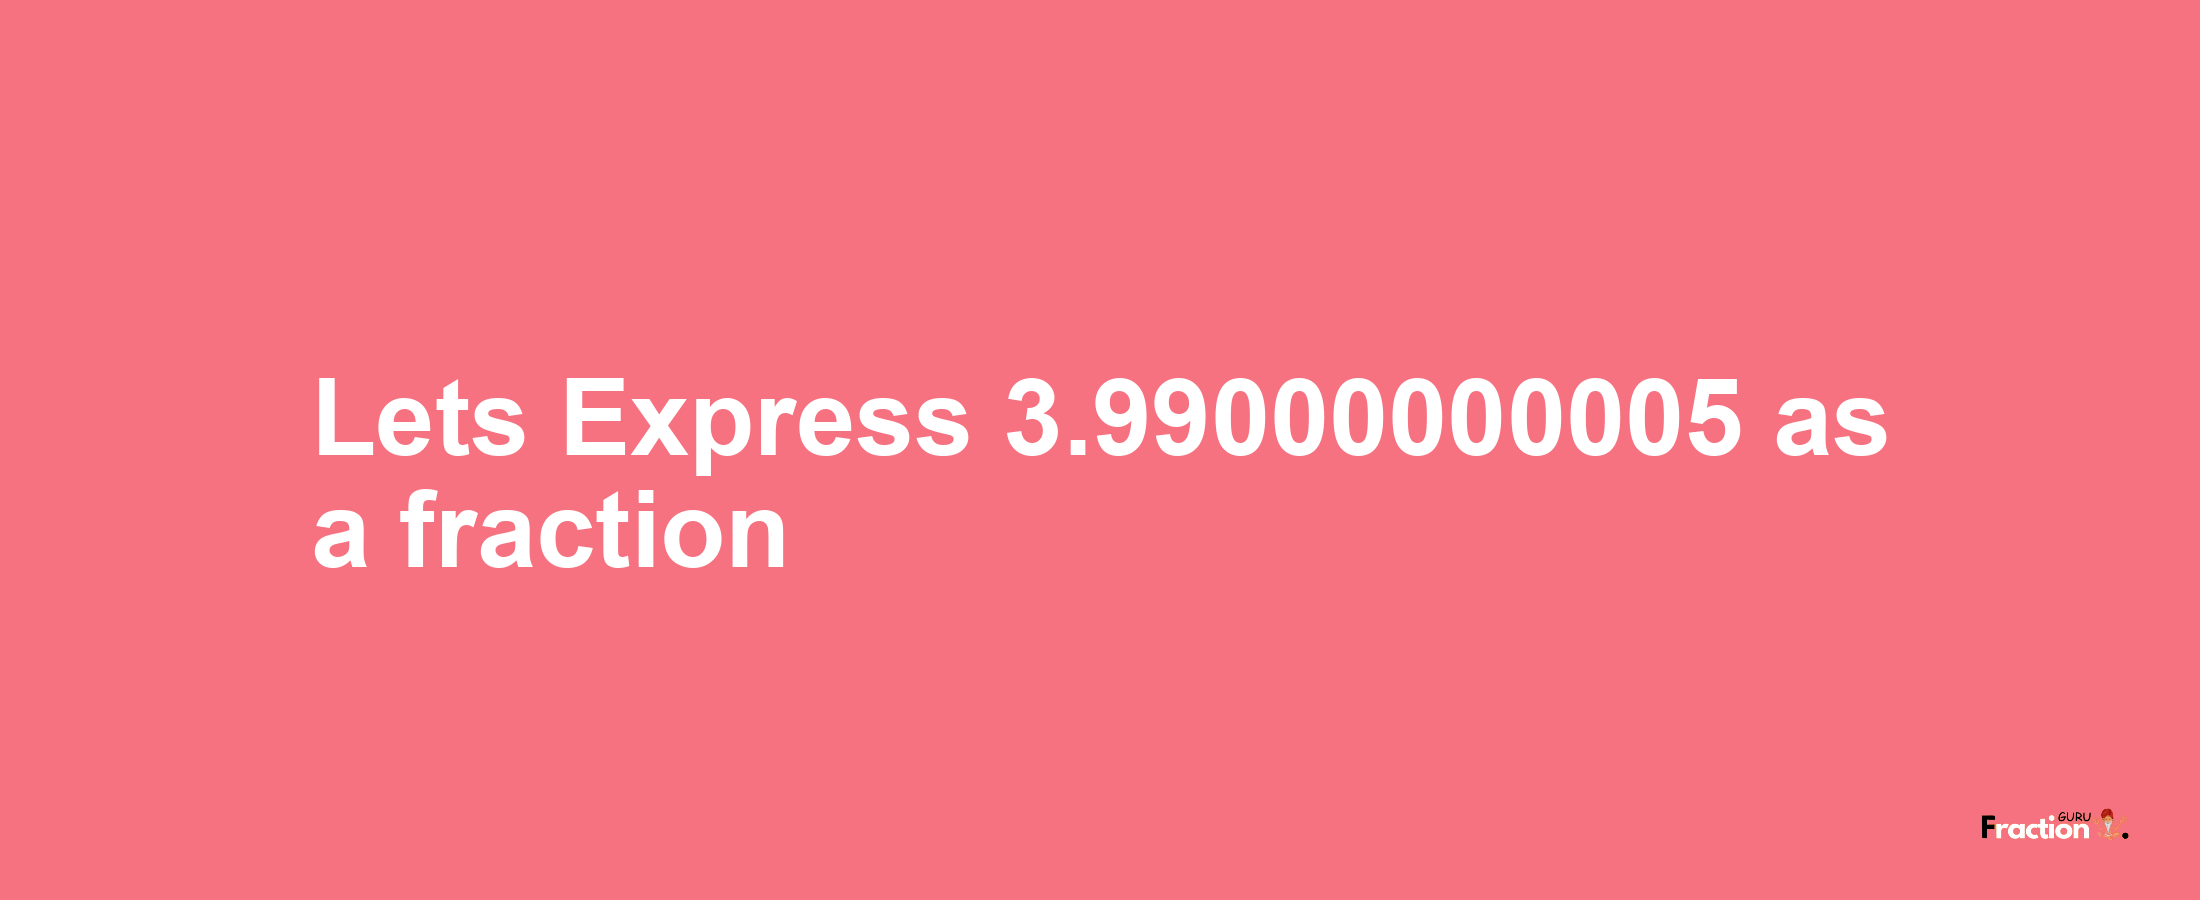 Lets Express 3.99000000005 as afraction